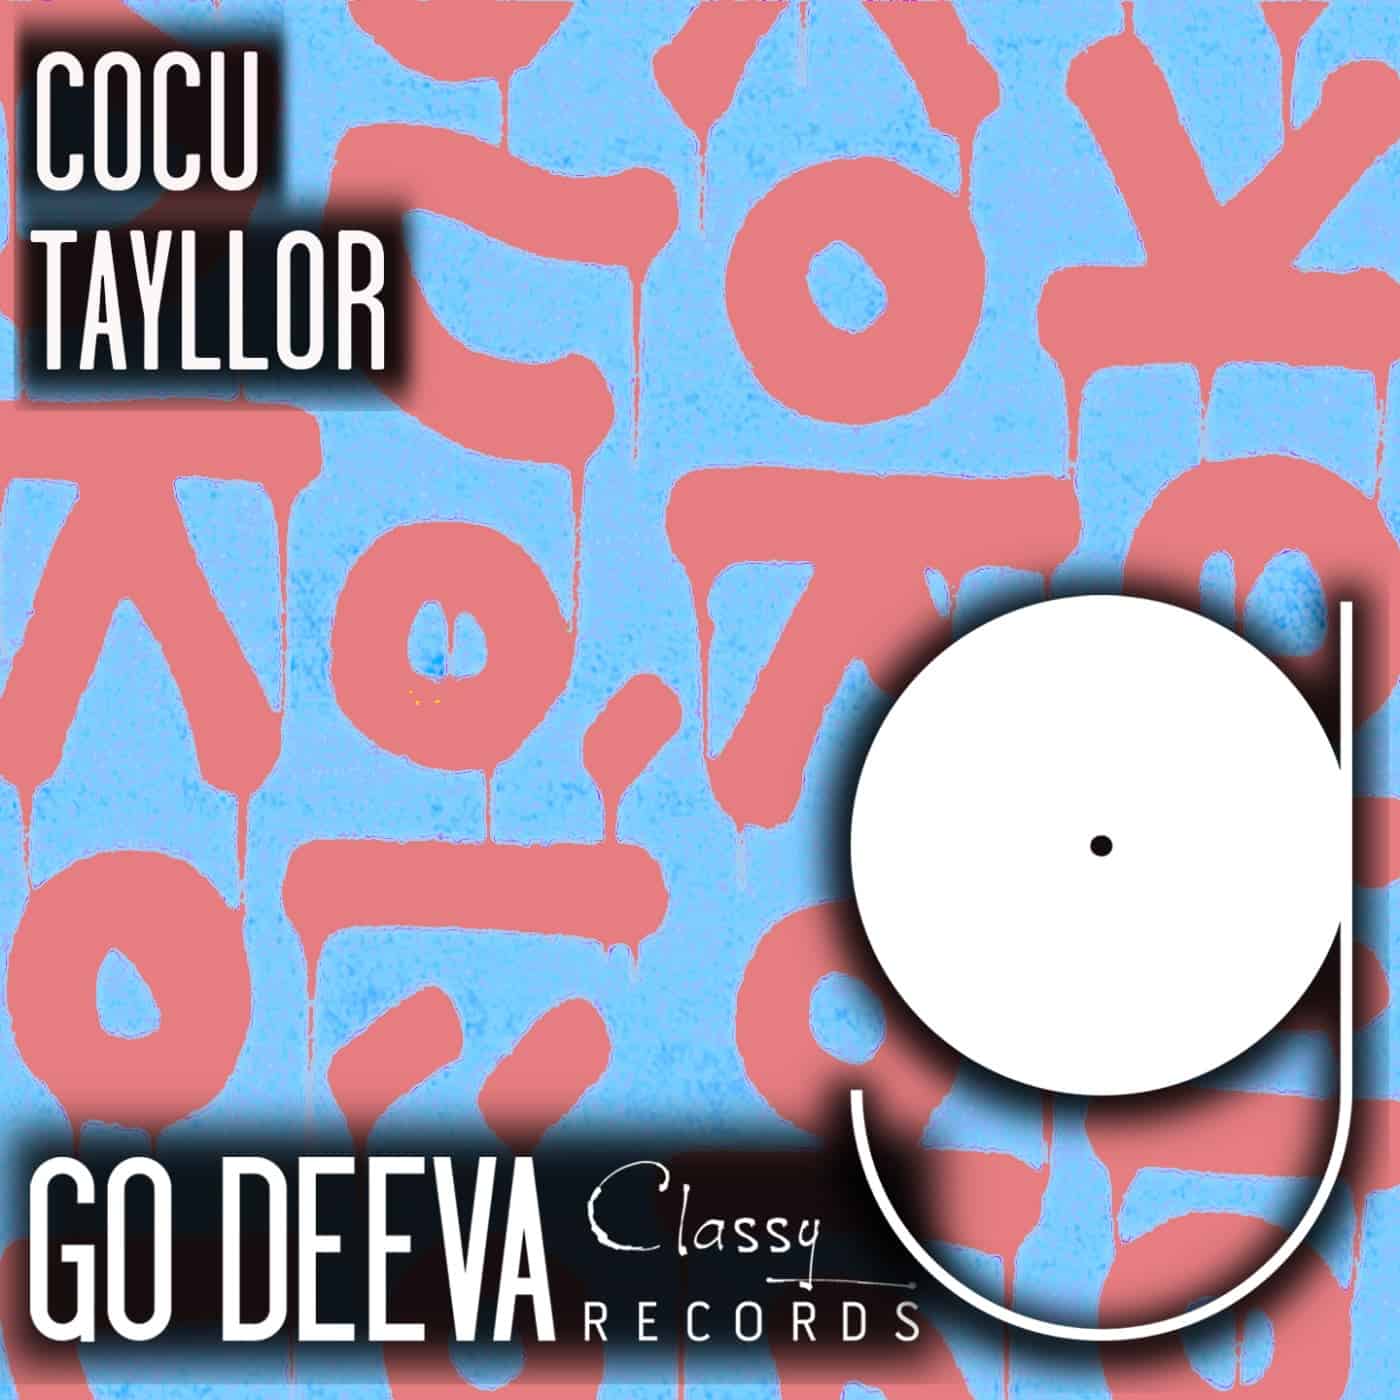 Download Tayllor - Cocu on Electrobuzz